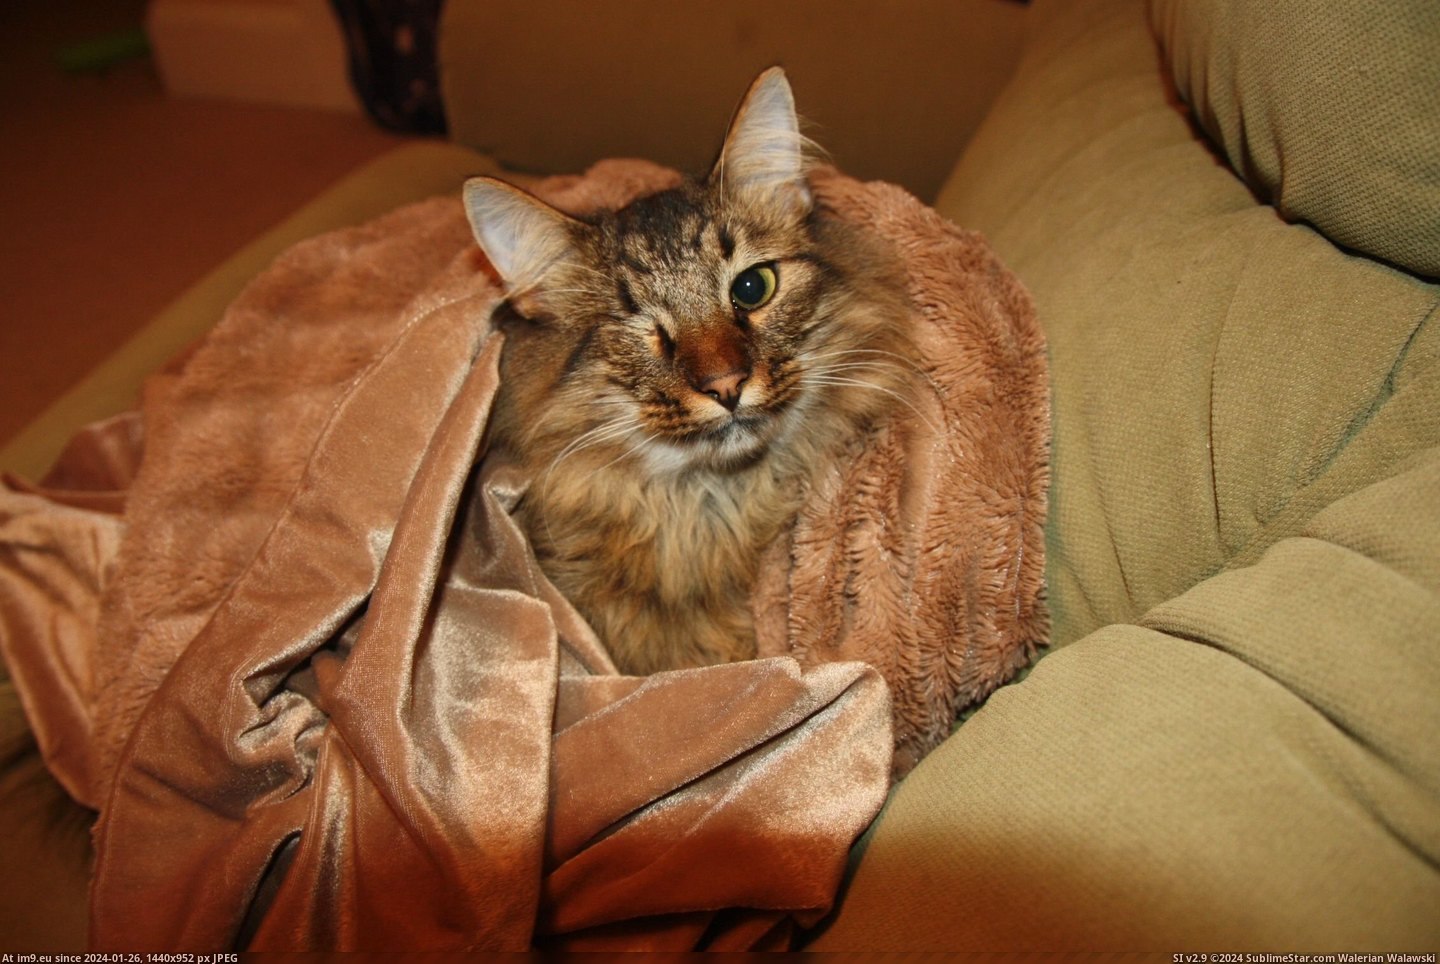 #Cats #Kitty #Wrapped #Fluffy #Soft #Blanket [Cats] my soft, fluffy kitty wrapped up in my soft, fluffy blanket Pic. (Image of album My r/CATS favs))